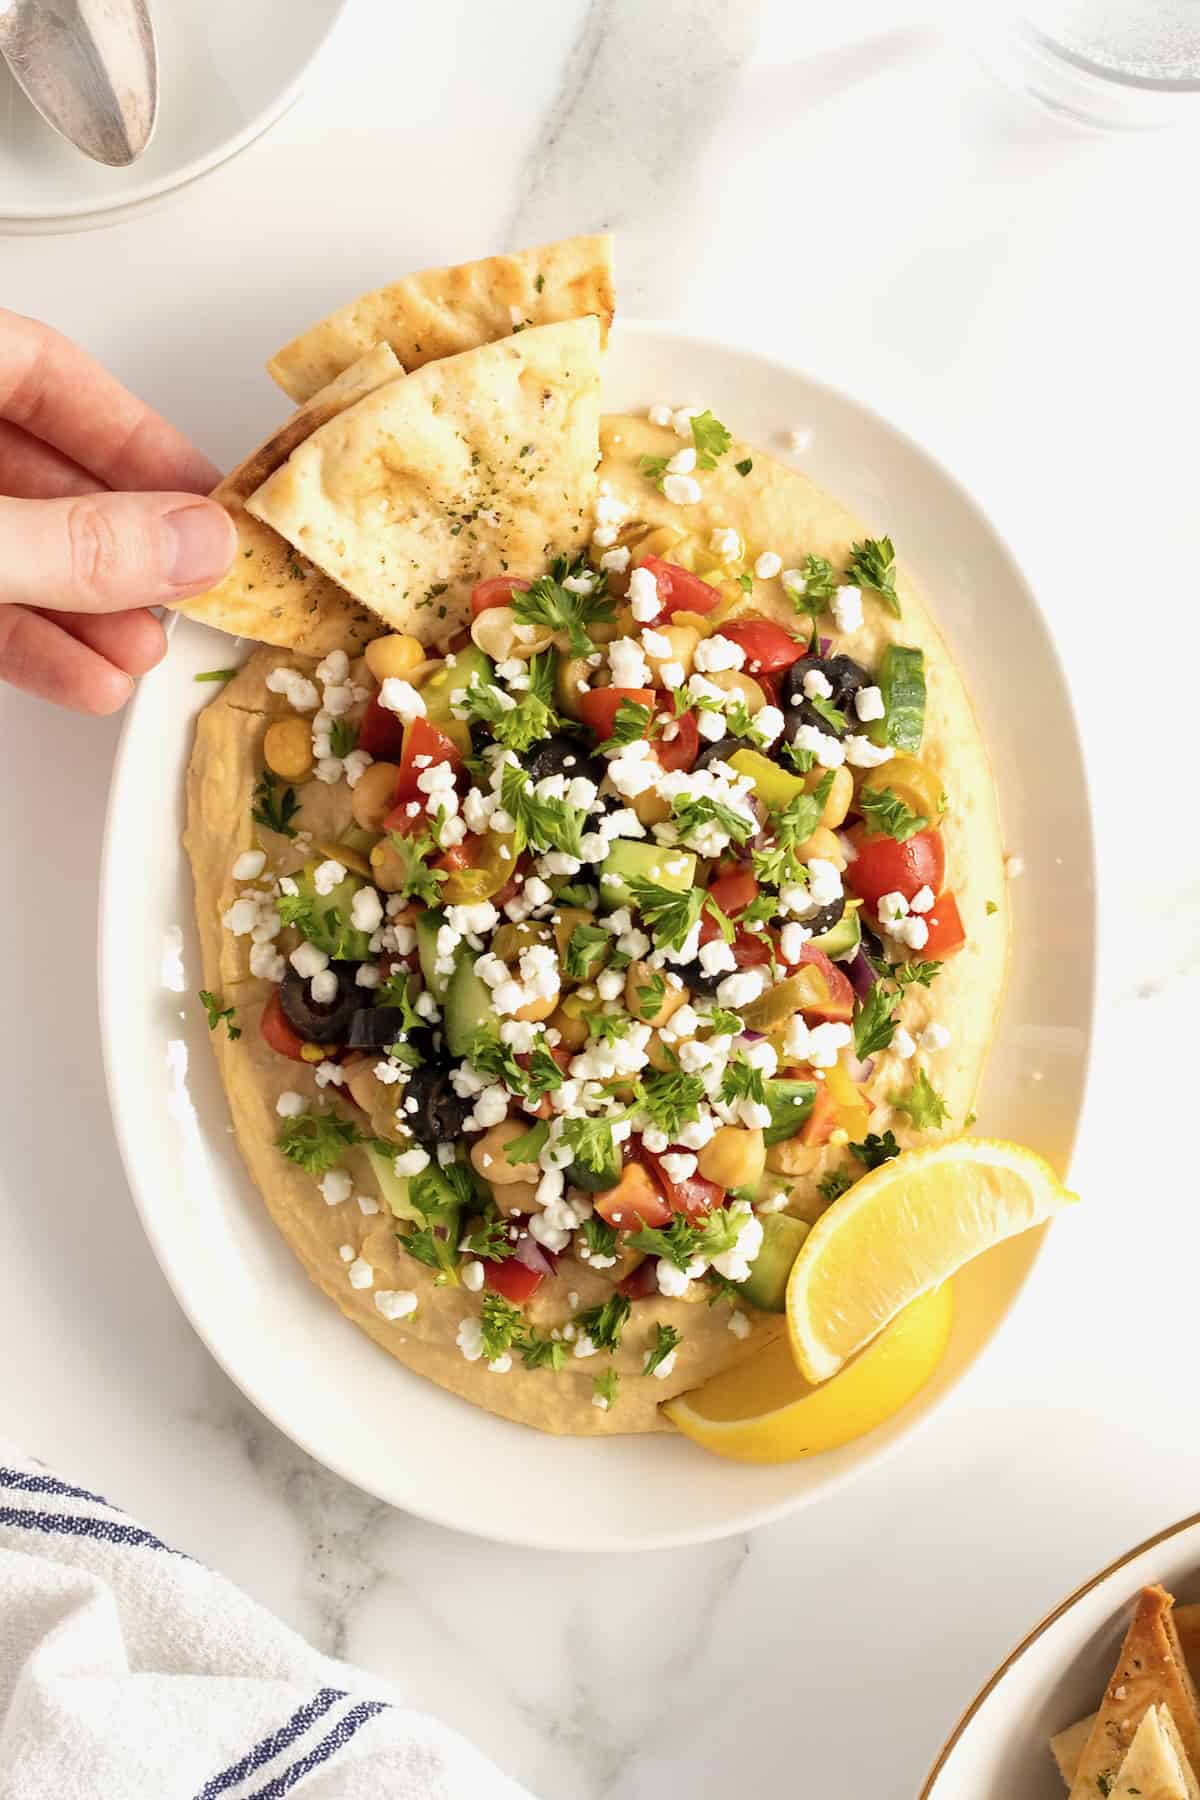 Hand grabbing pita triangle from loaded hummus topped with tomatoes, olives, cucumber, chickpeas, red onion and pepperoncini peppers in a white ceramic serving dish.